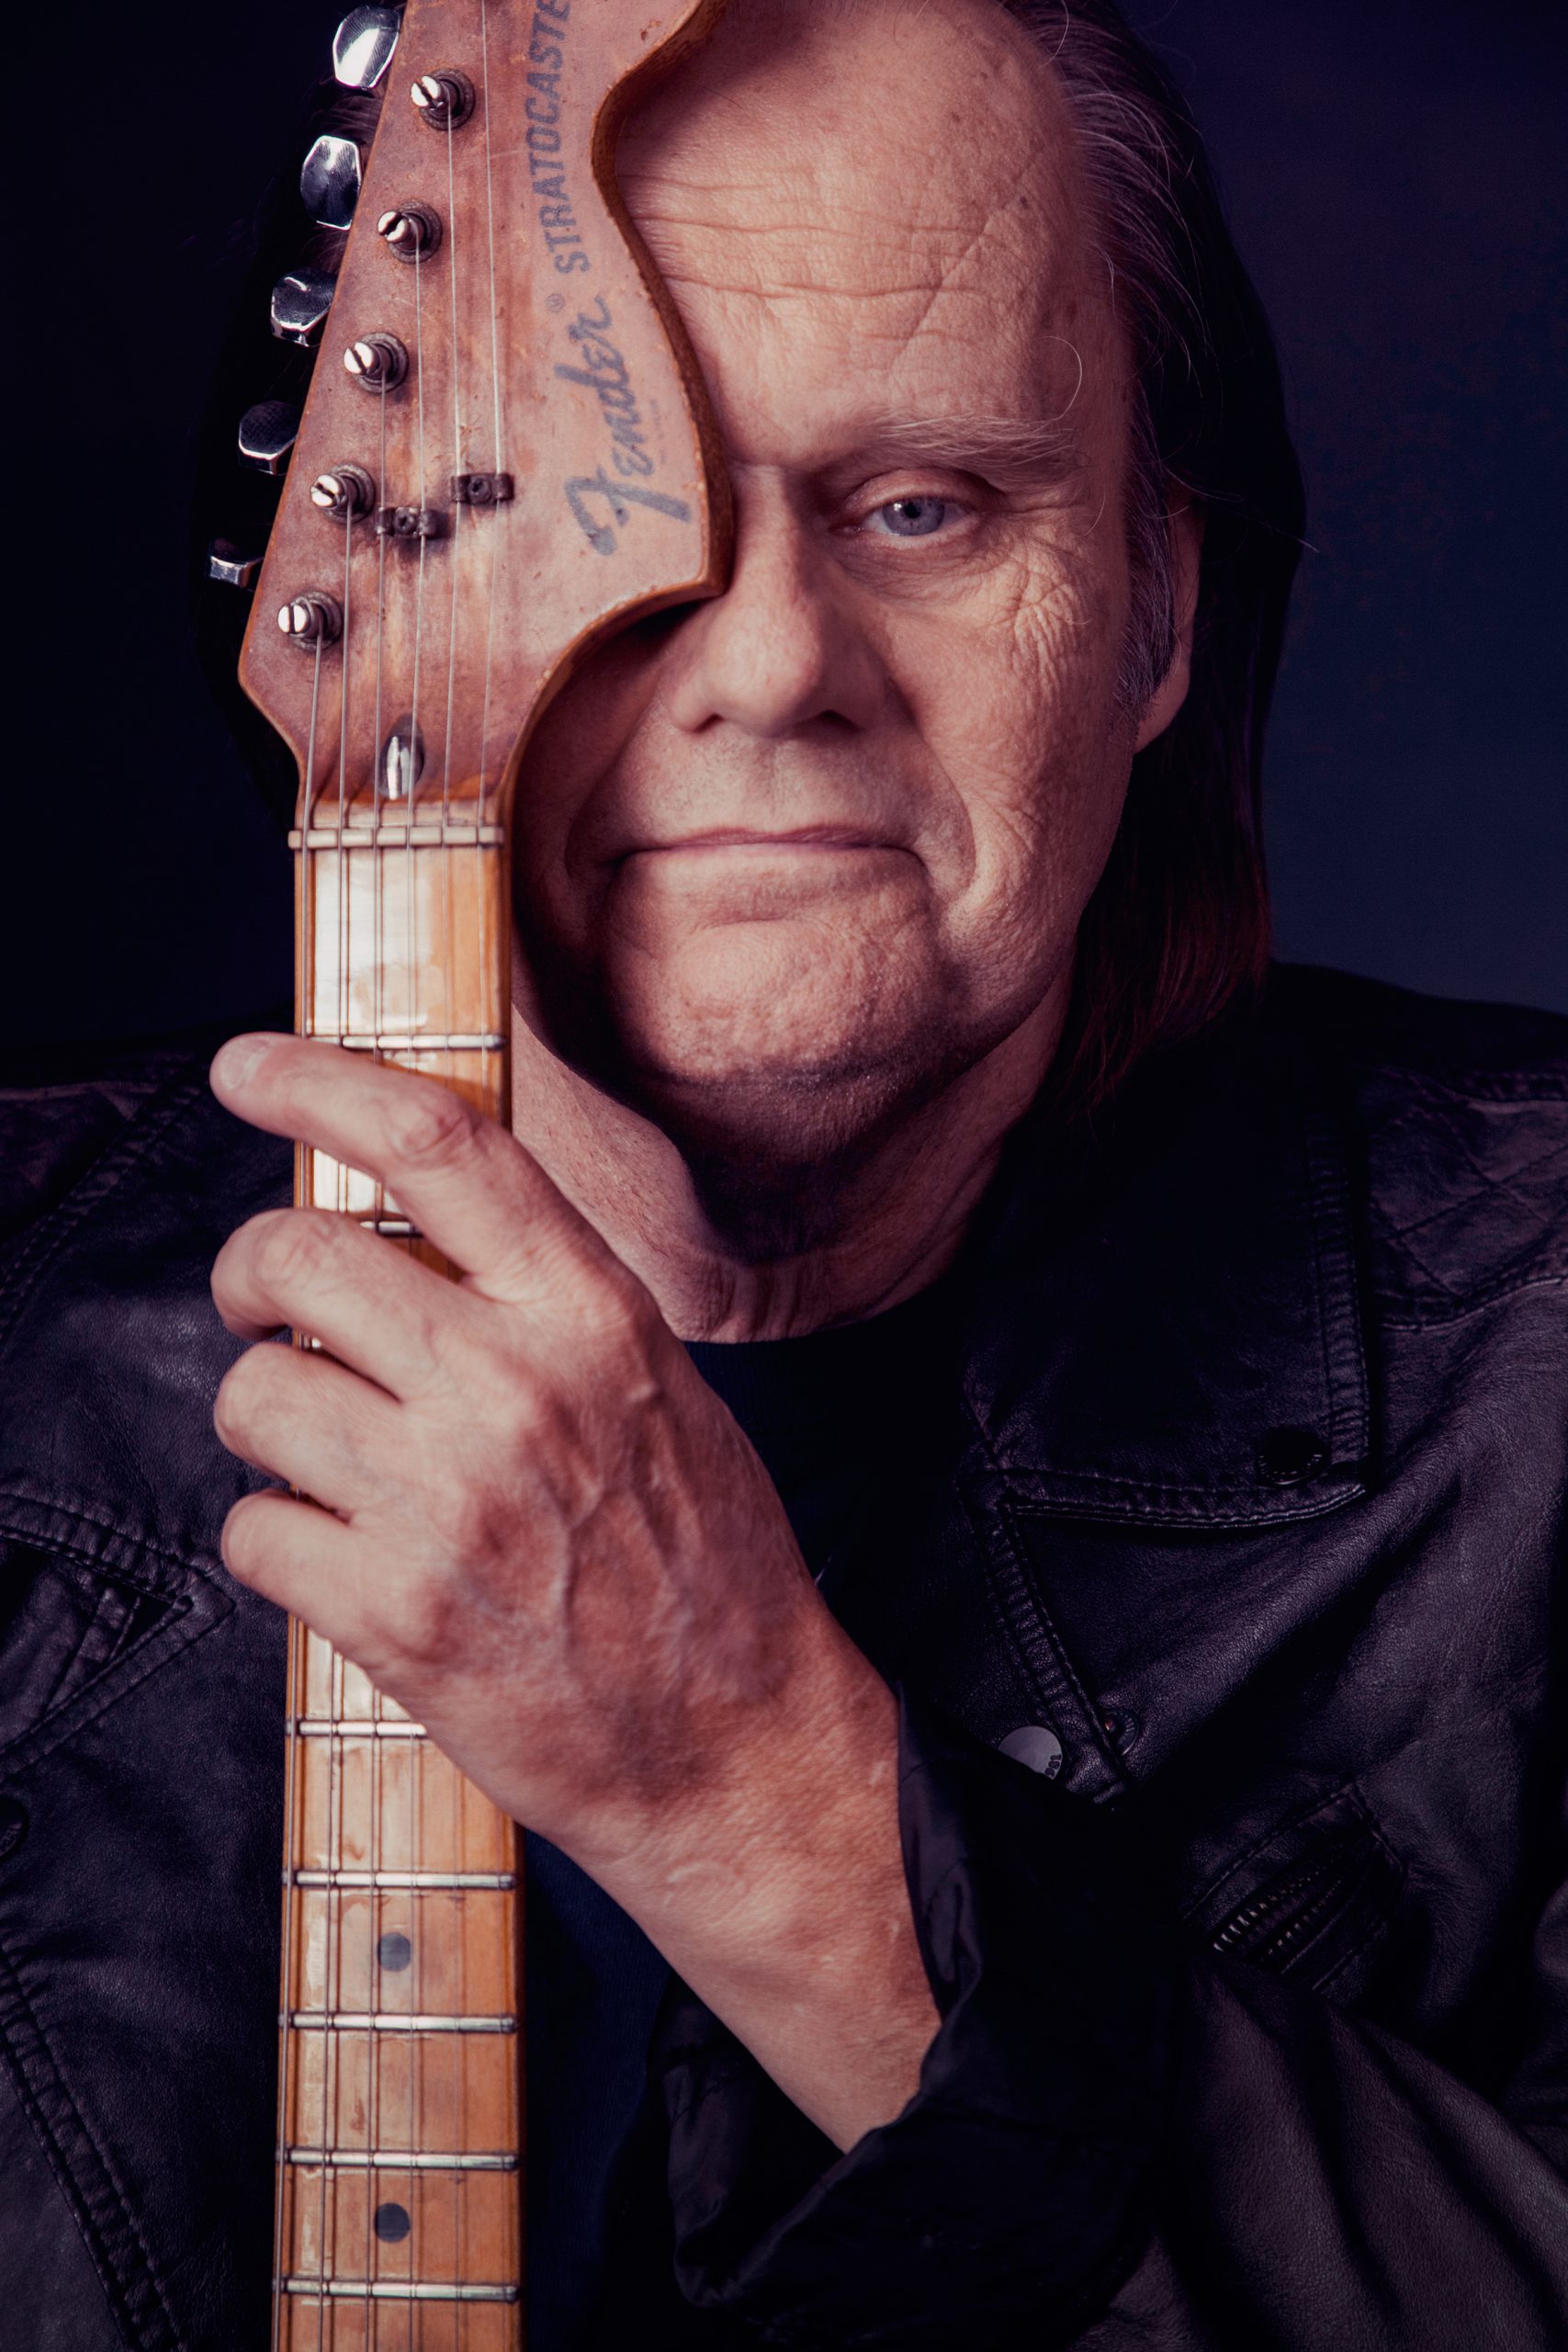 Walter Trout Touring with New Recording